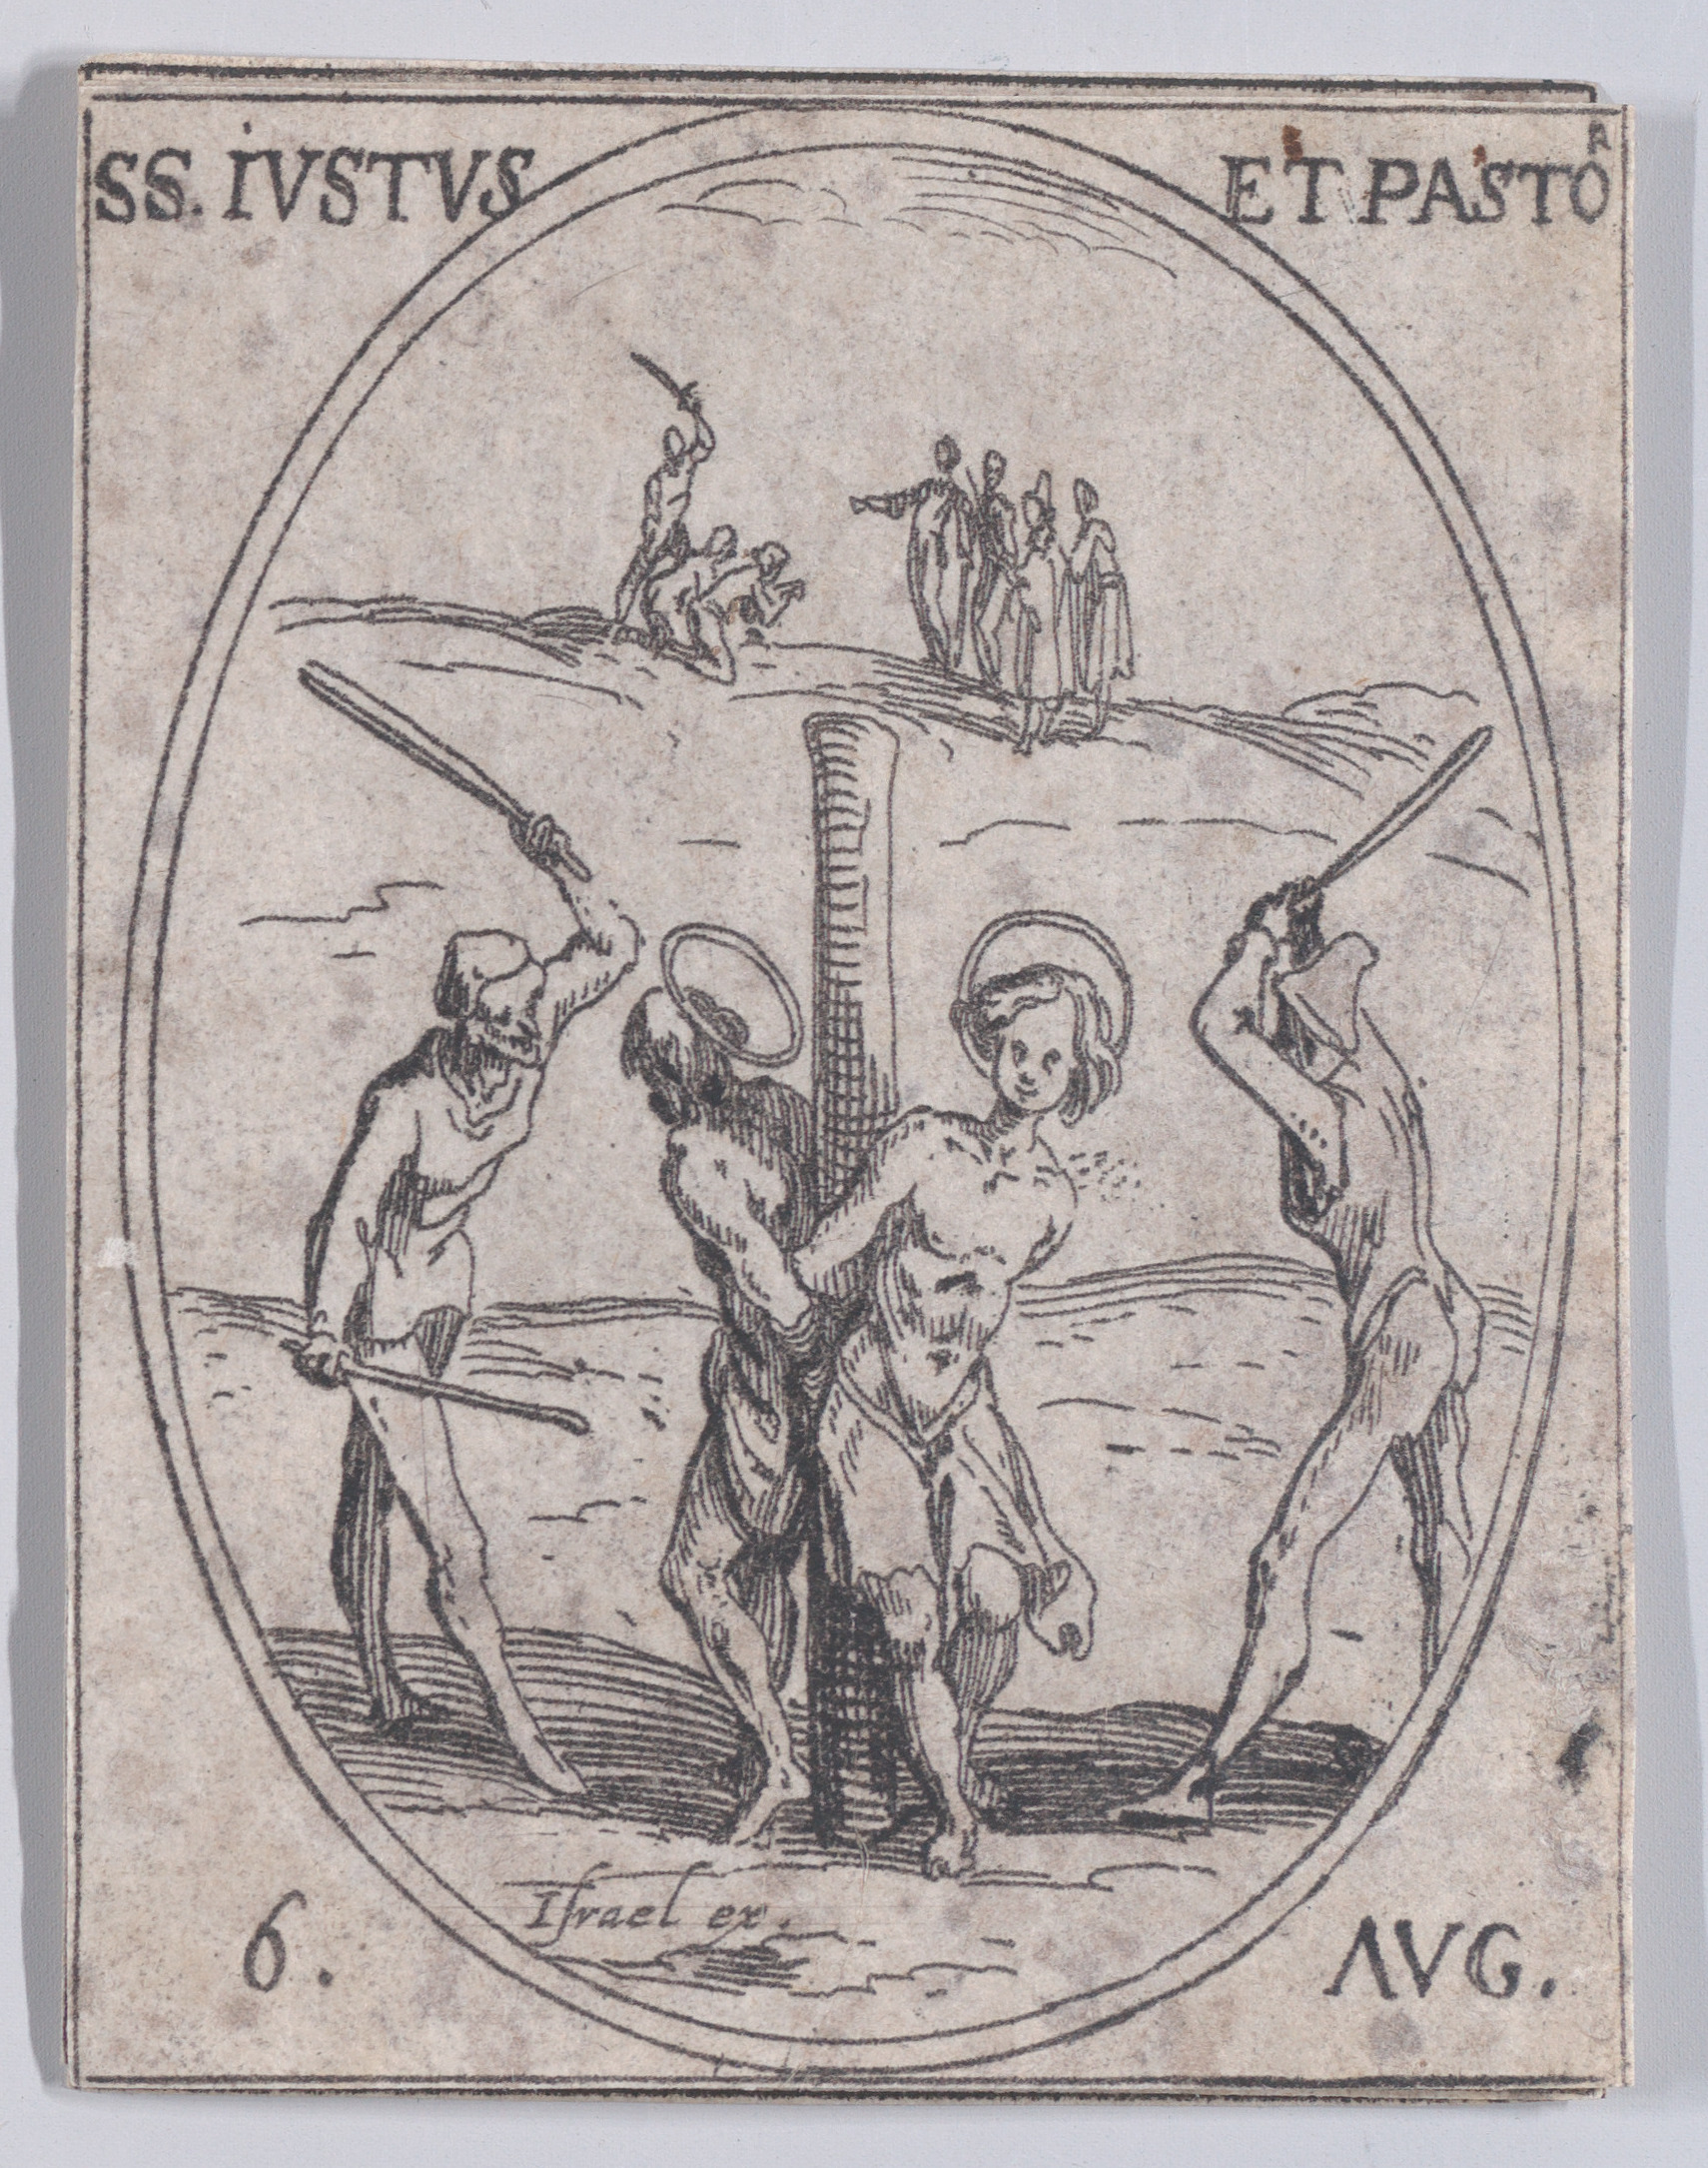 S. Juste et S. Pastor (St. Justus and St. Pastor), August 6th, from Les Images De Tous Les Saincts et Saintes de L'Année (Images of All of the Saints and Religious Events of the Year), Jacques Callot (French, Nancy 1592–1635 Nancy), Etching; second state of two (Lieure)